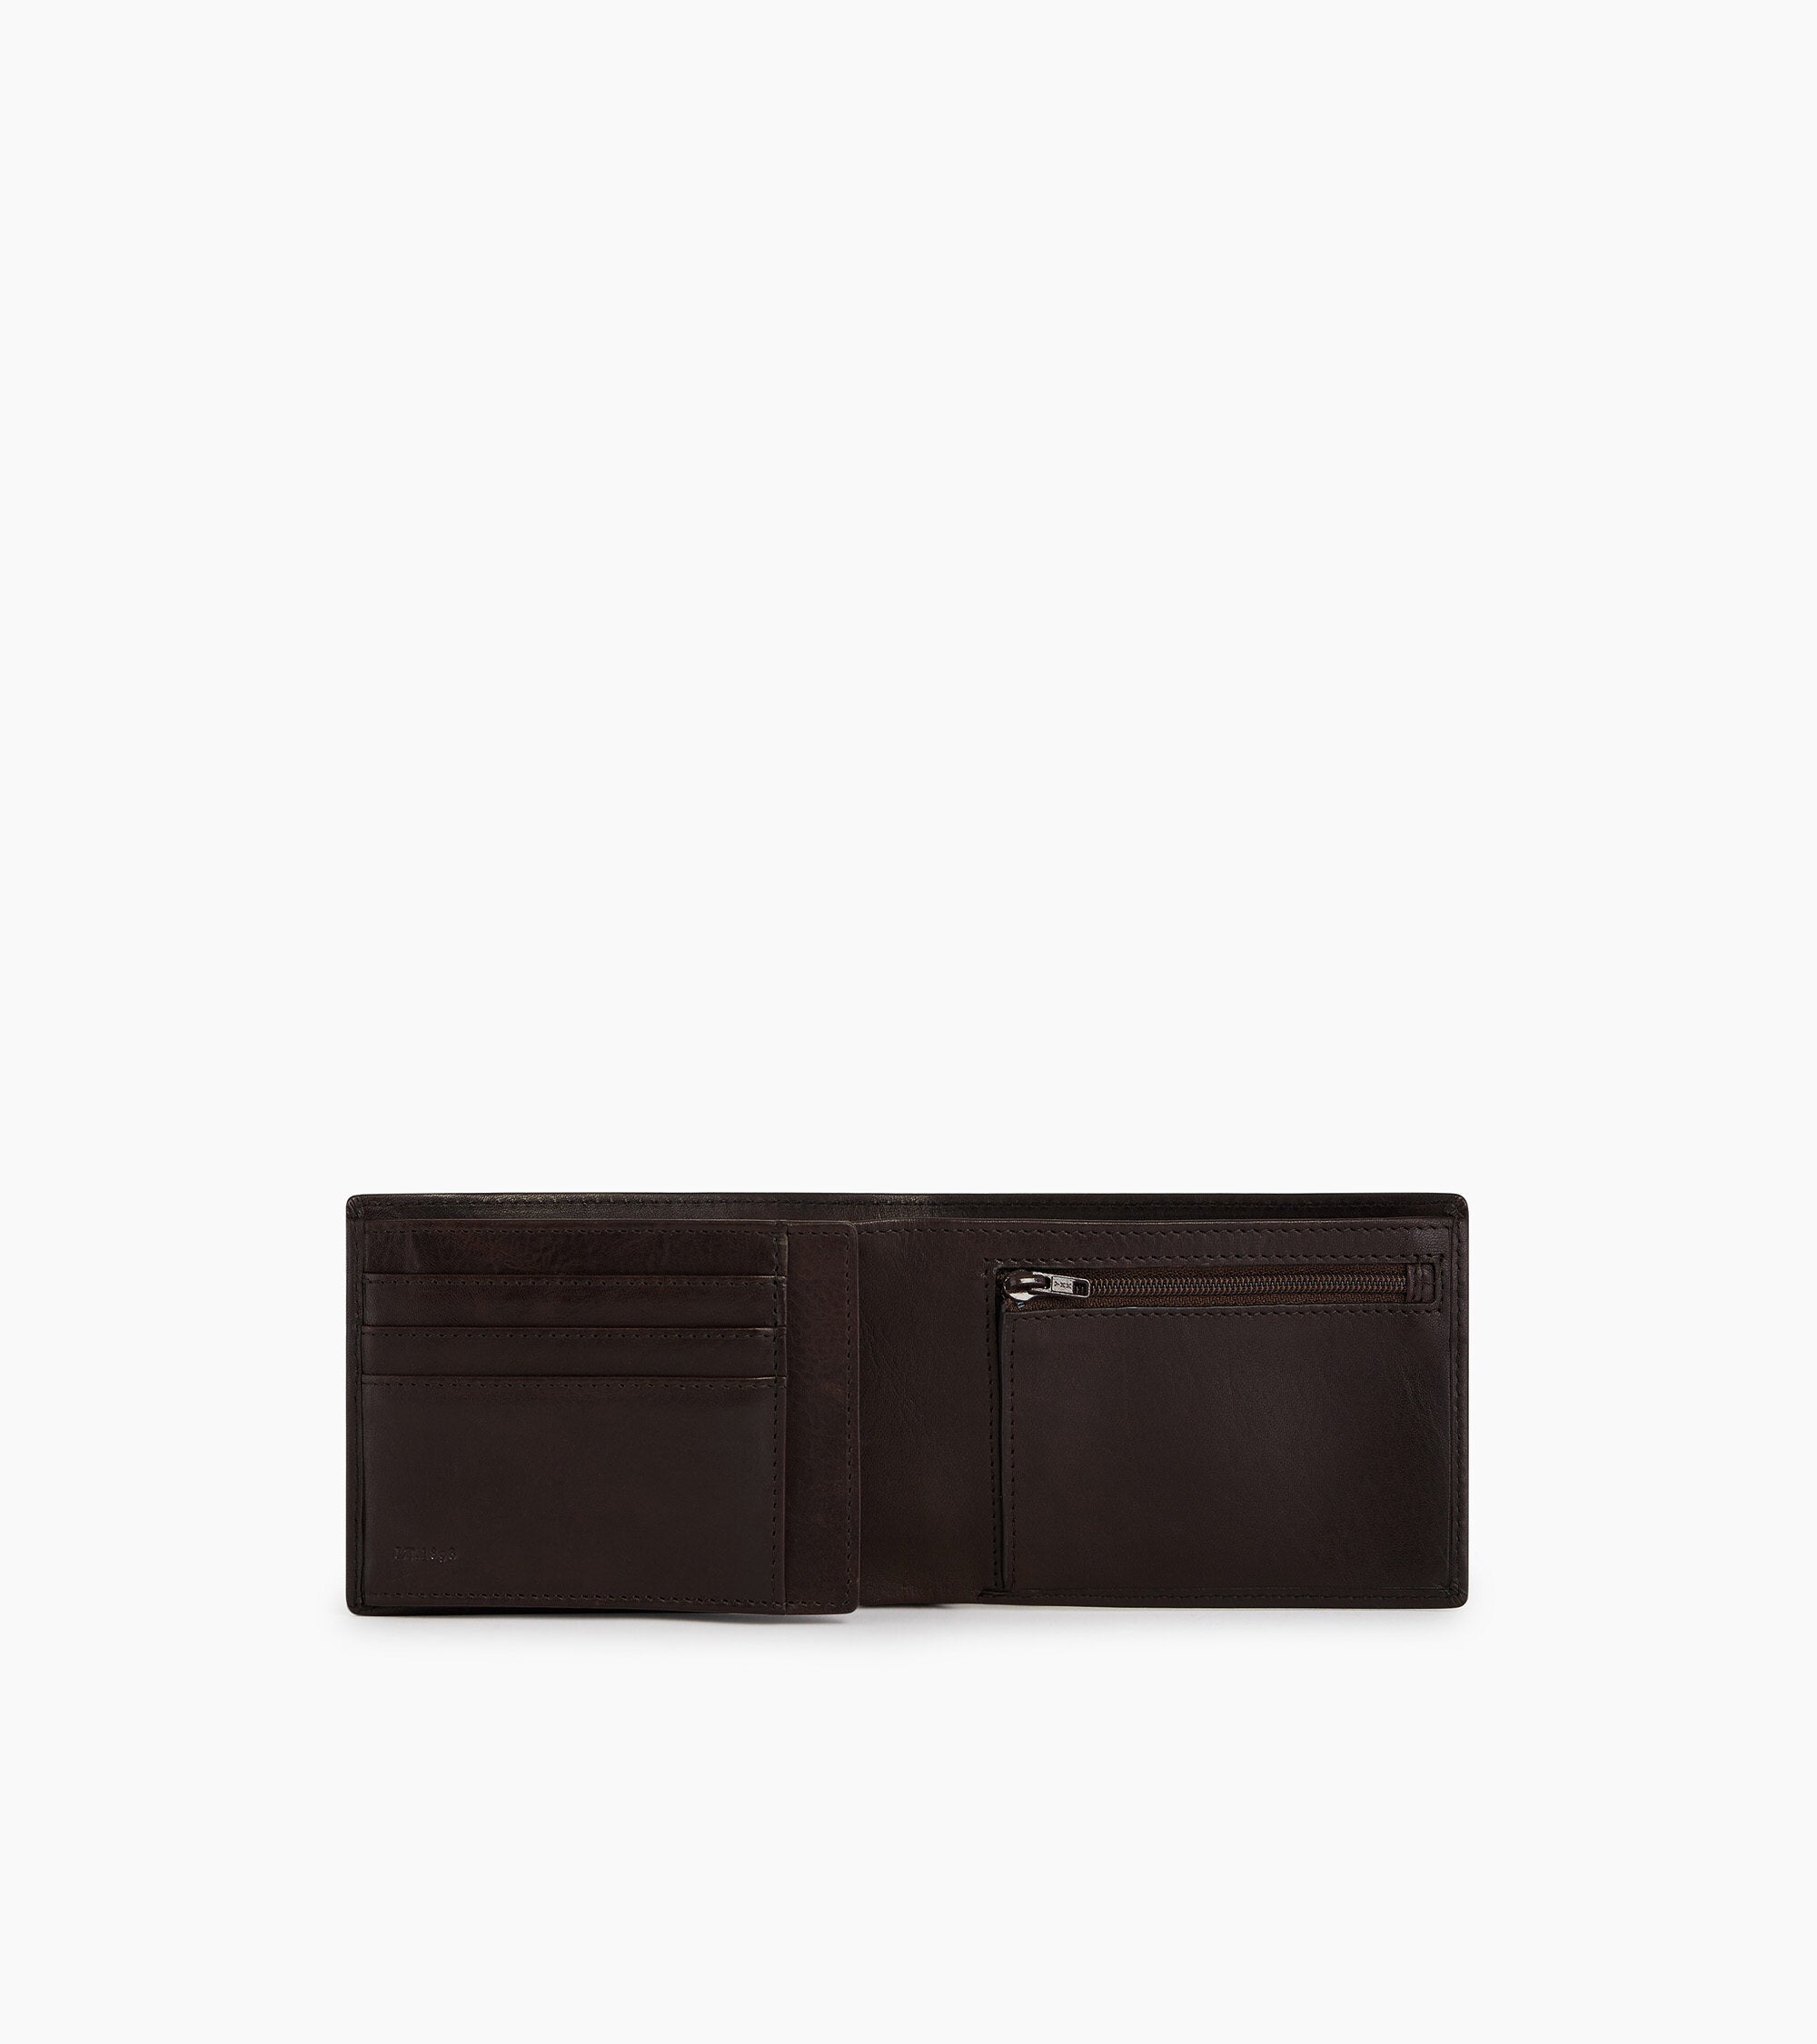 Gary medium horizontal wallet model 2 flaps in oiled leather